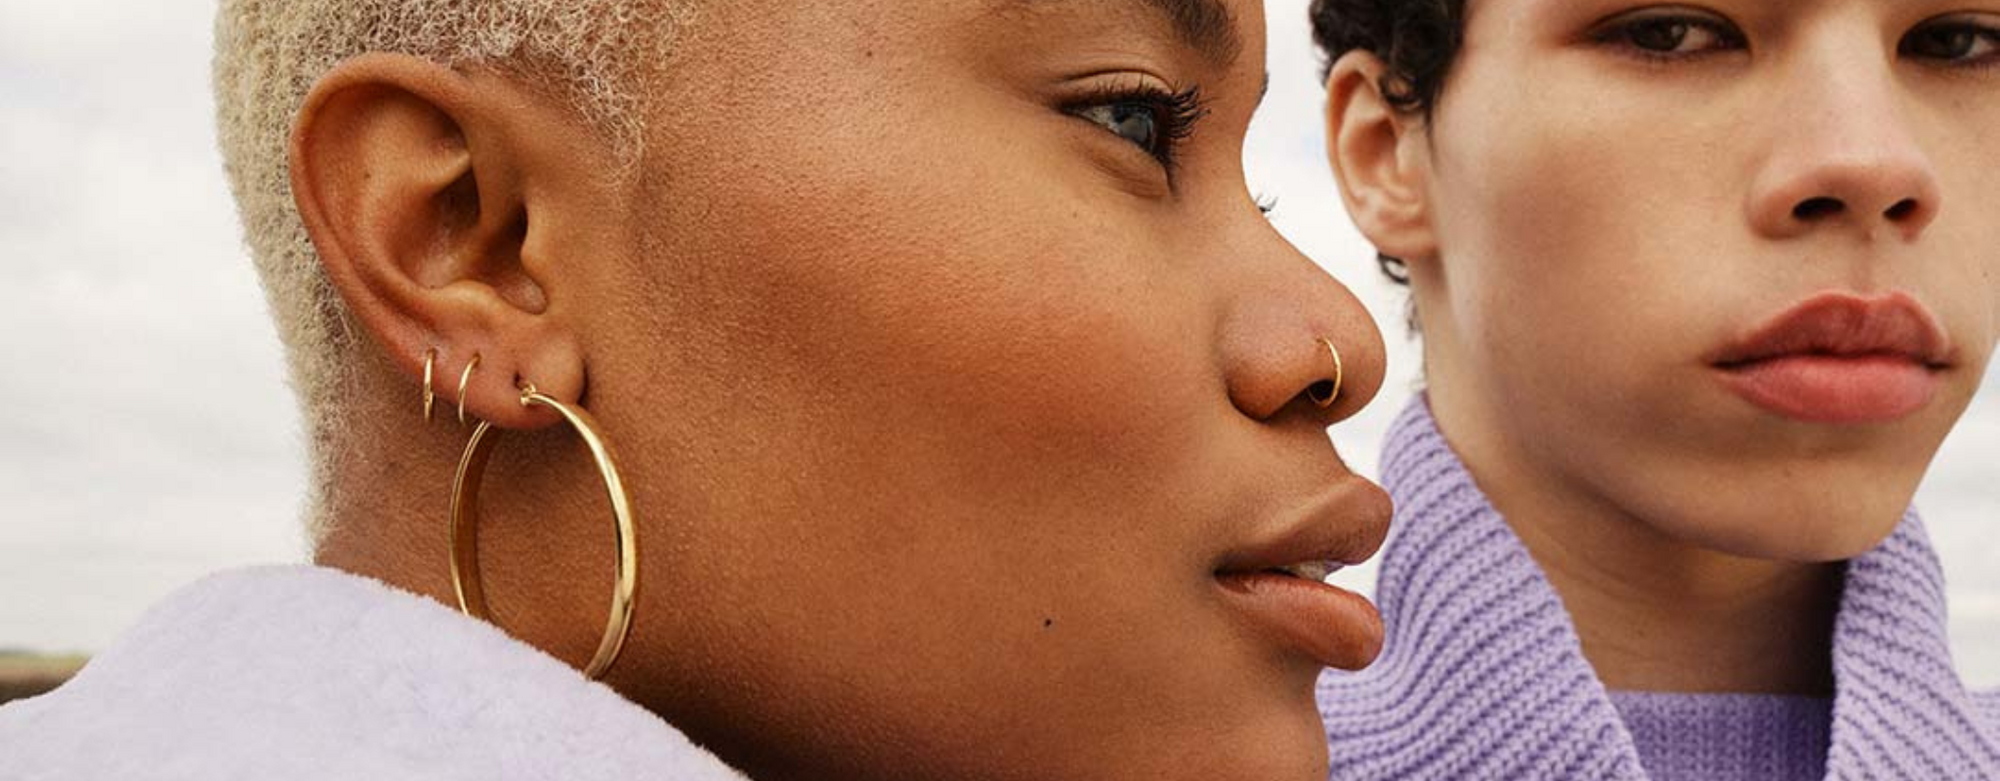 Photo of two people with ear piercings and nose piercings. 